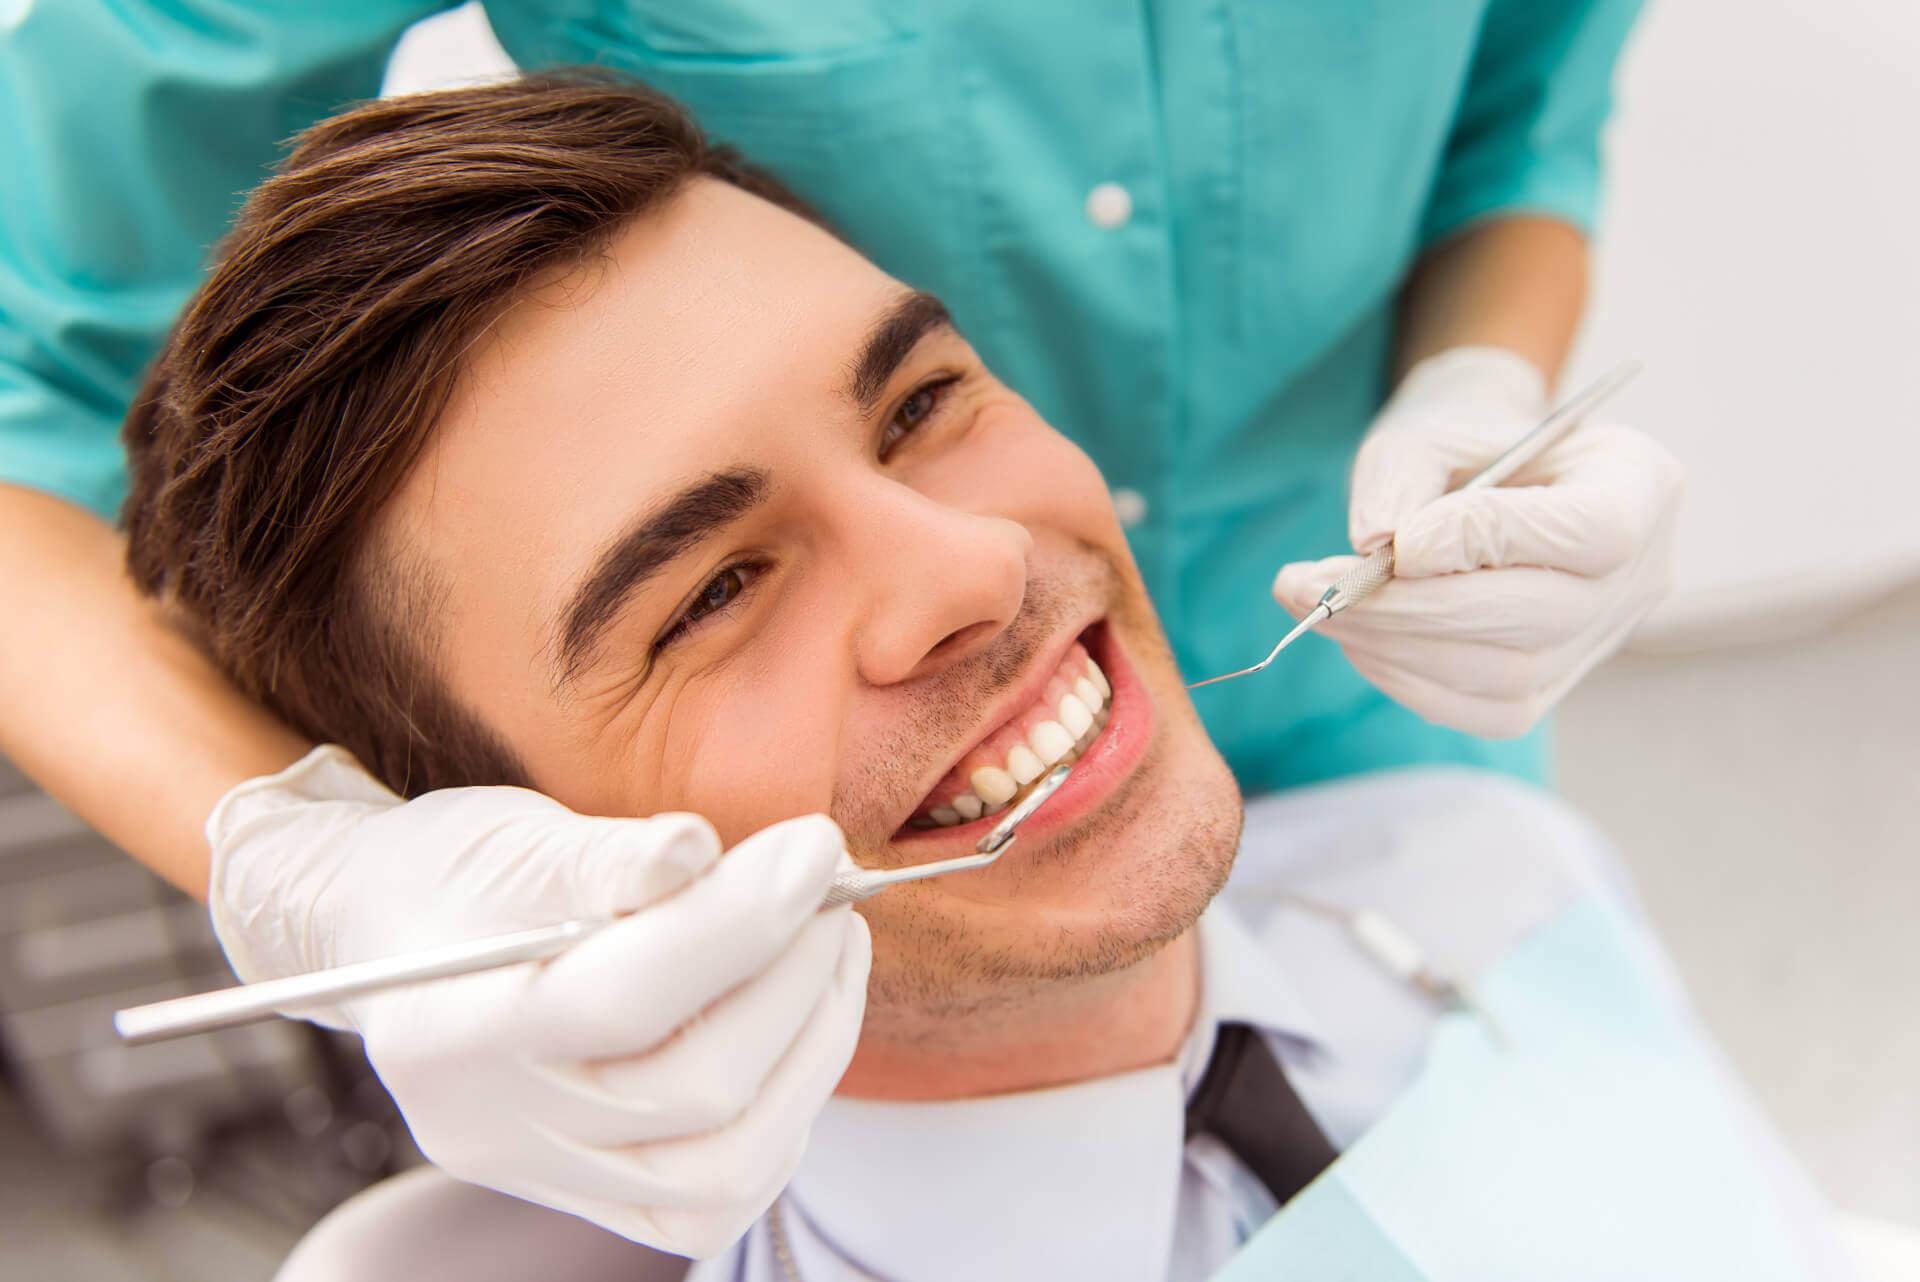 Discover The 9 Main Areas Of Dentistry To Work In